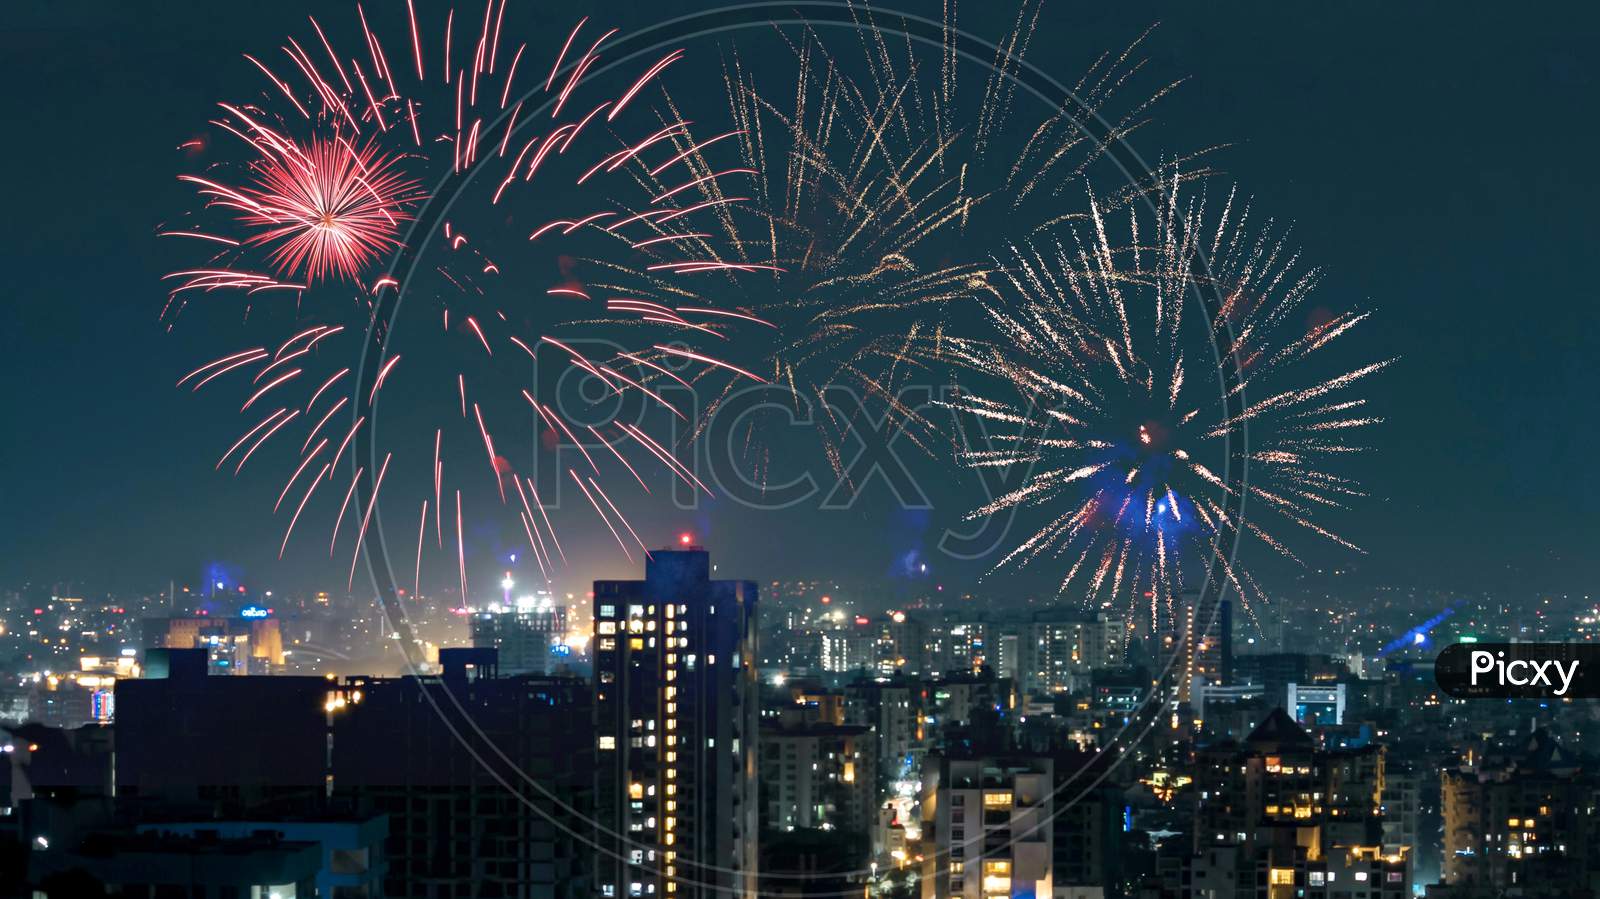 Cityscape at night and fireworks